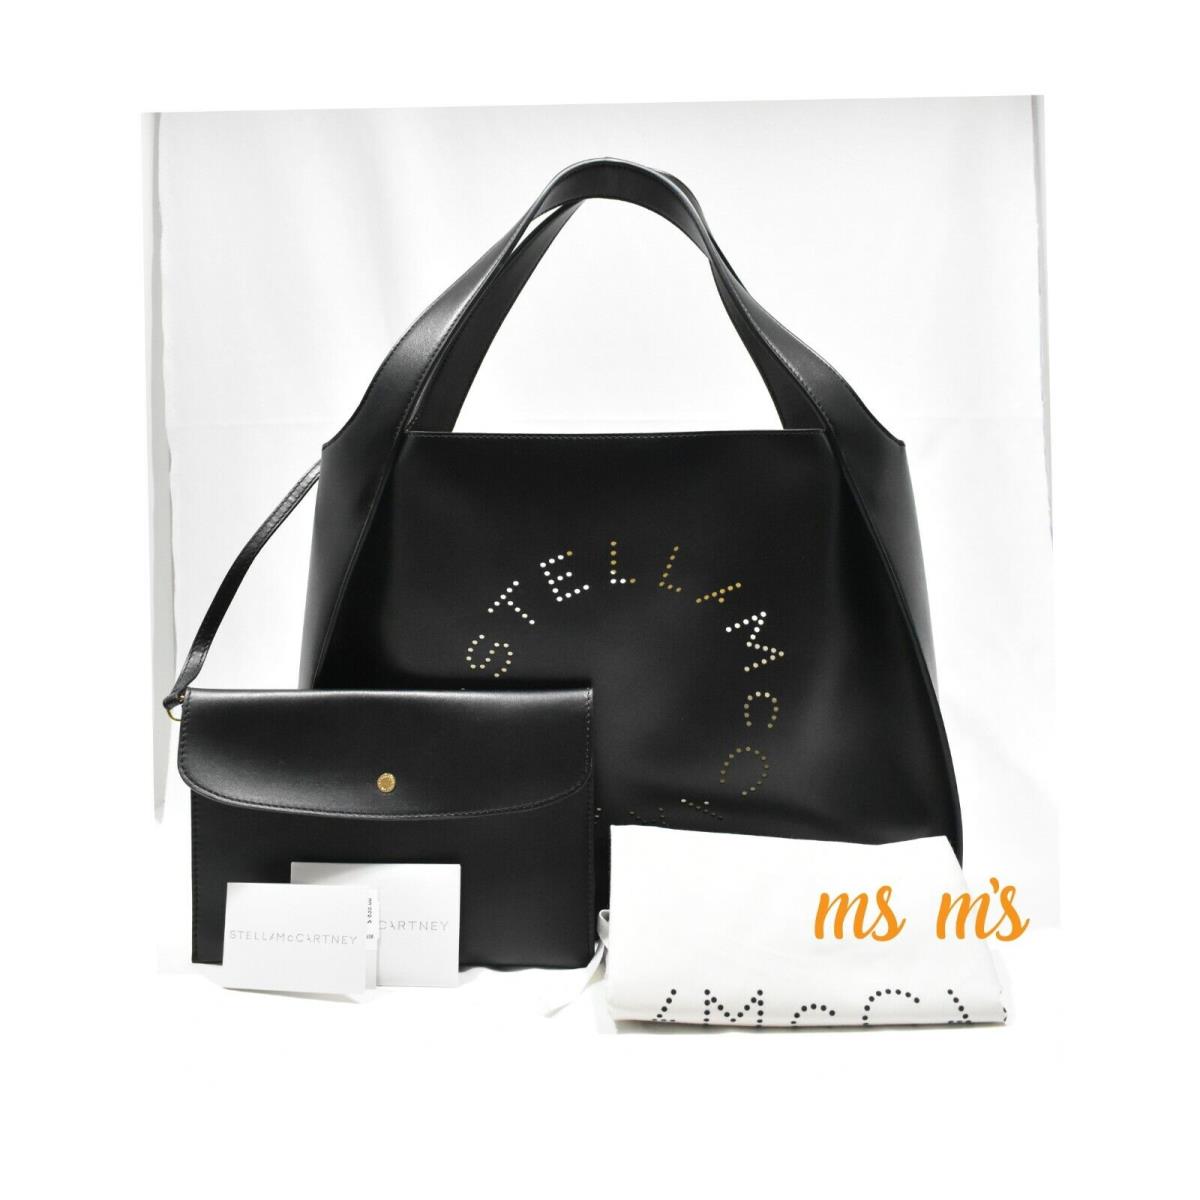 Stella Mccartney Black Leather Alter East West Perforated Tote Shopper